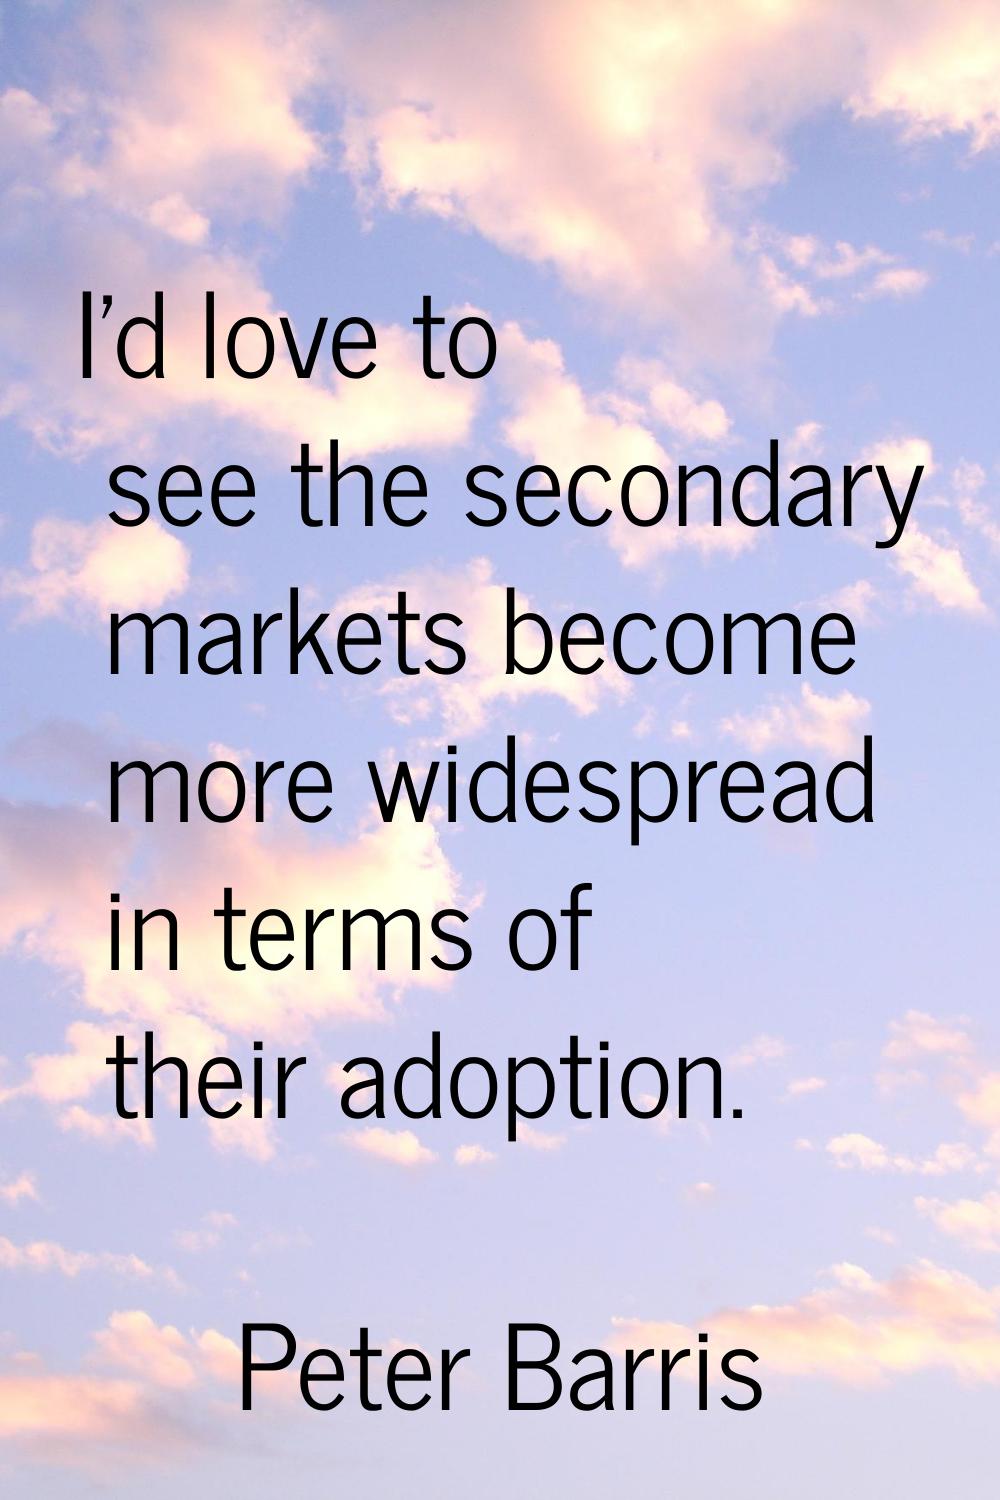 I'd love to see the secondary markets become more widespread in terms of their adoption.